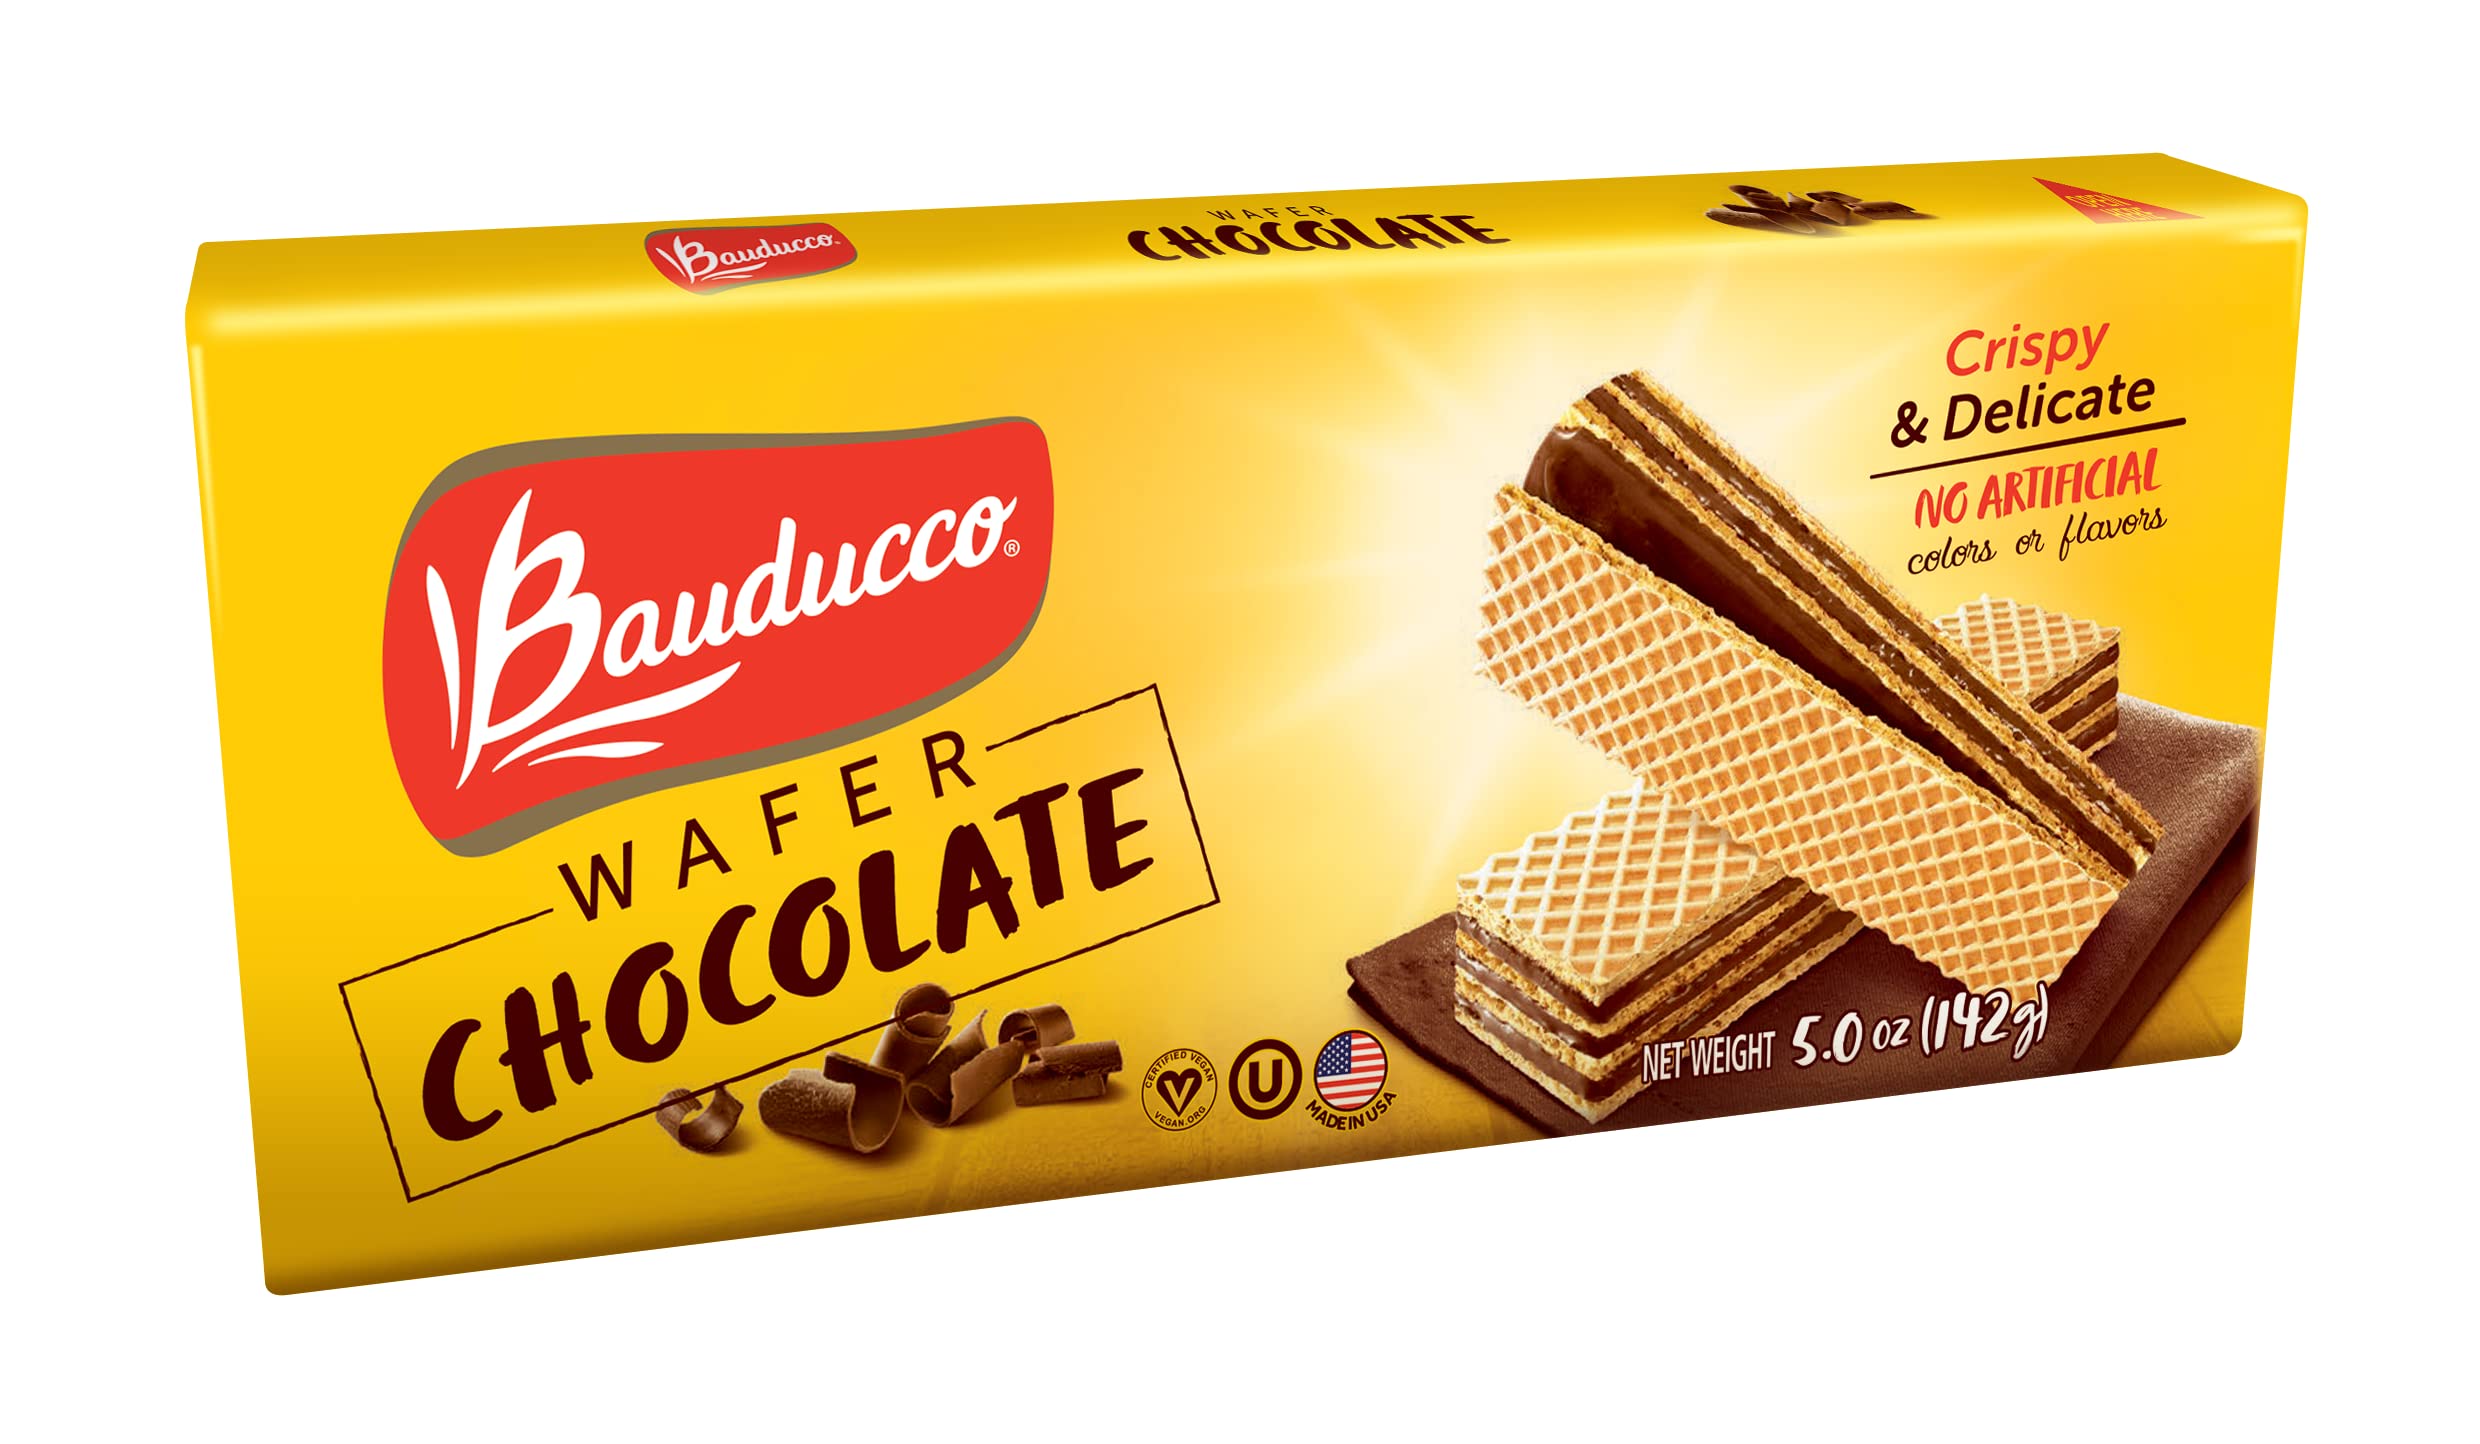 Bauducco Crispy Wafer Cookies - Various Flavors - 5.0 oz (Pack of 1) - Free Shipping for Amazon Prime Members $1.25